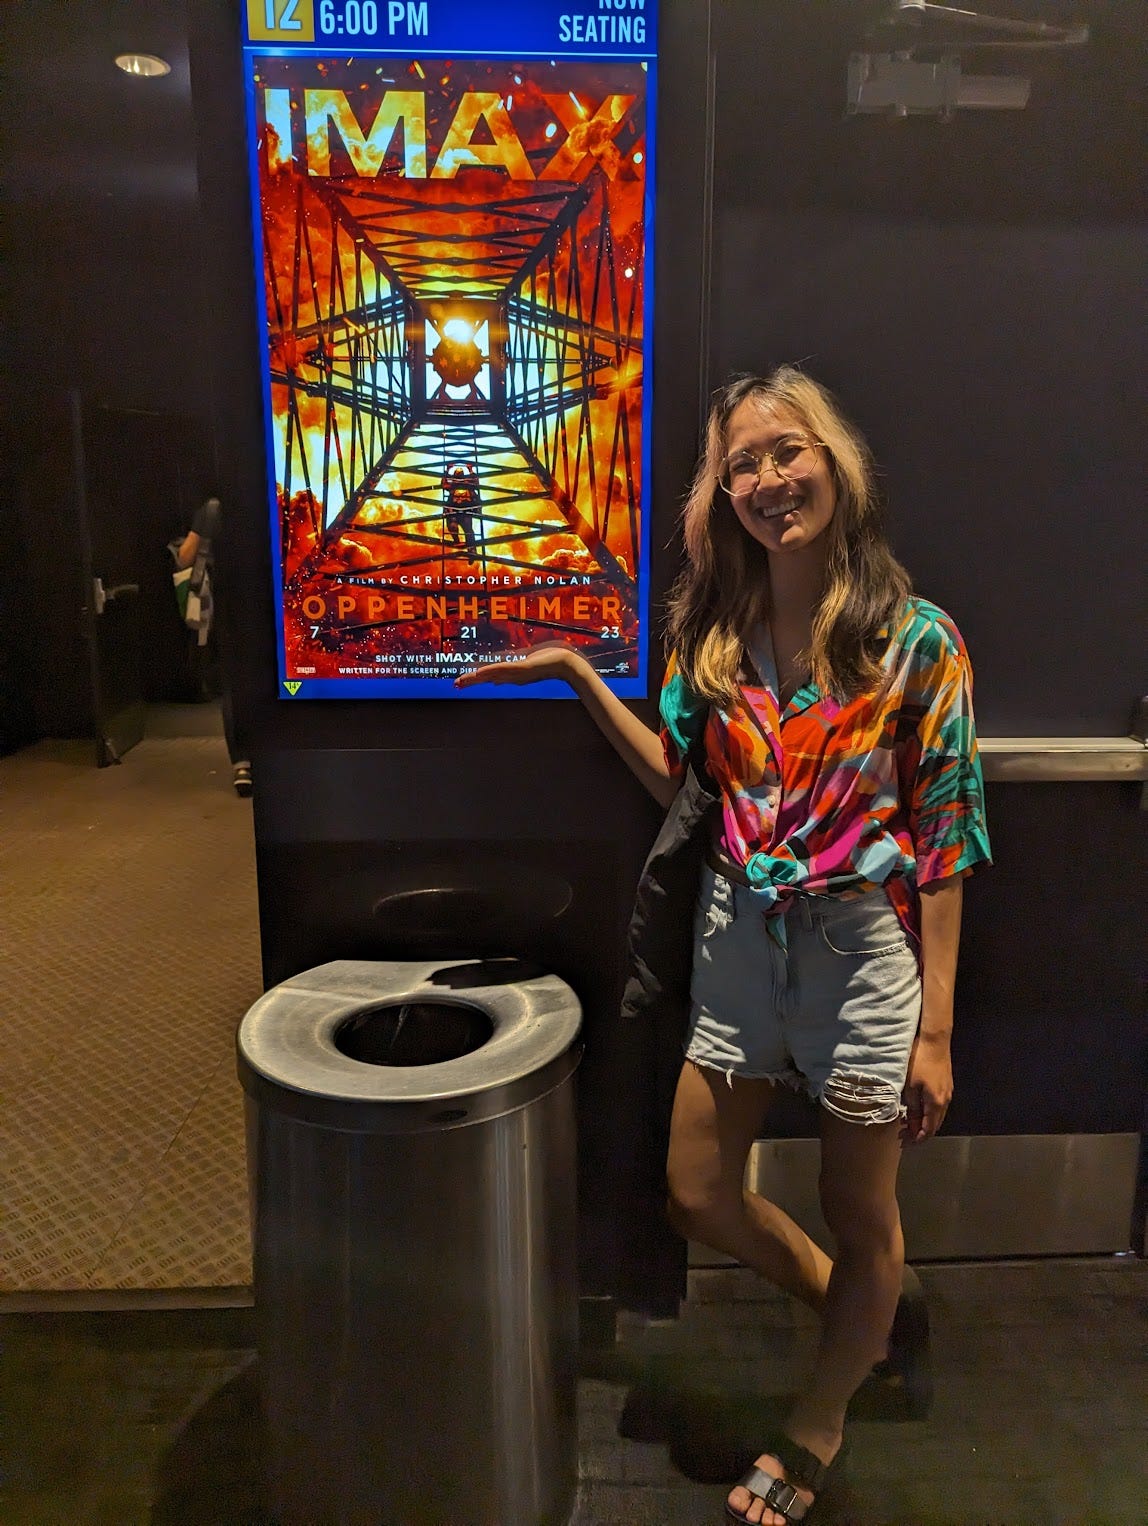 Sennah poses with the Oppenheimer poster with a trash can in front of it